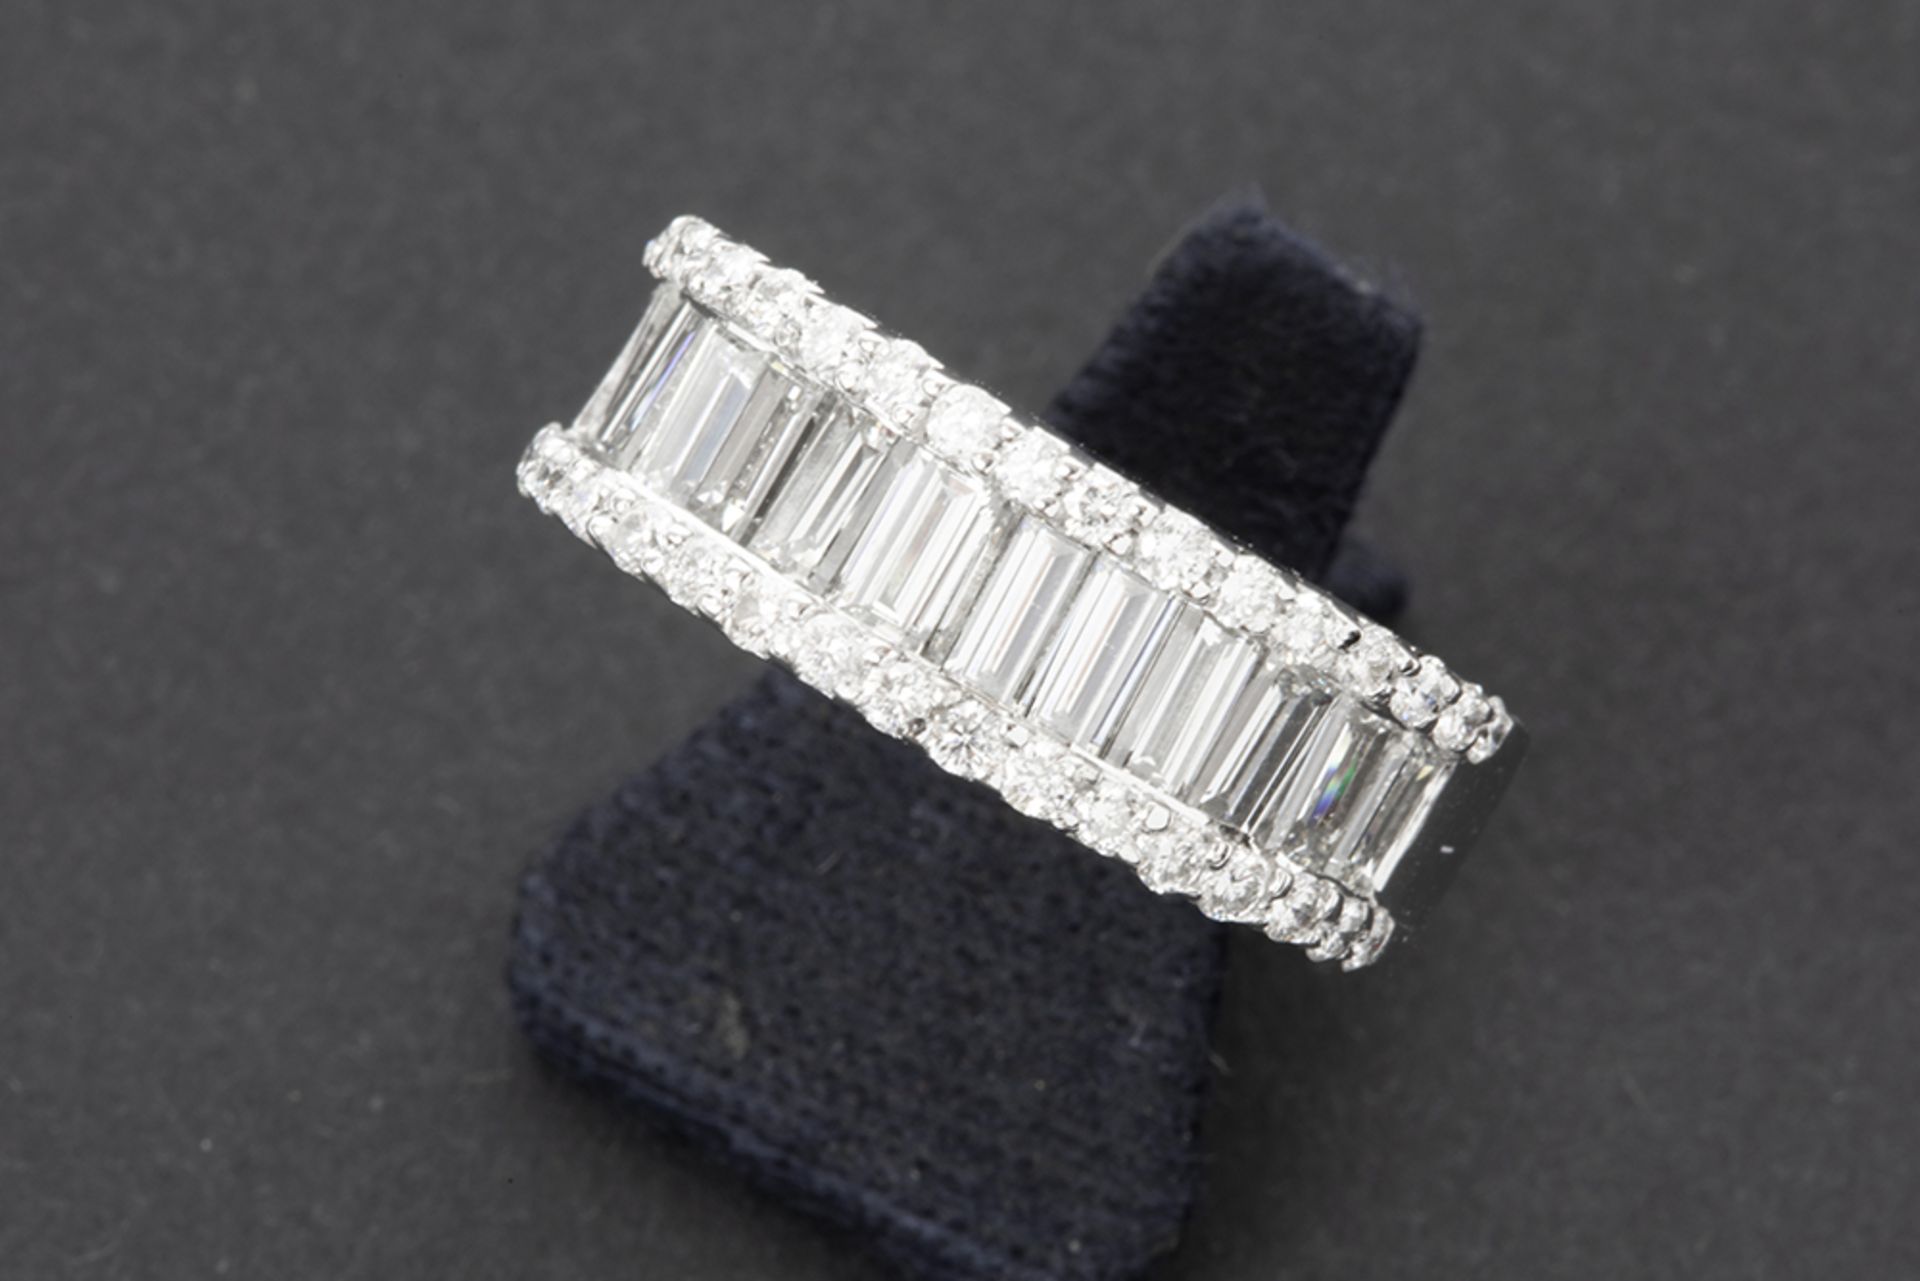 classy ring in white gold (18 carat) with ca 1,60 carat of high quality baguette and brilliant cut